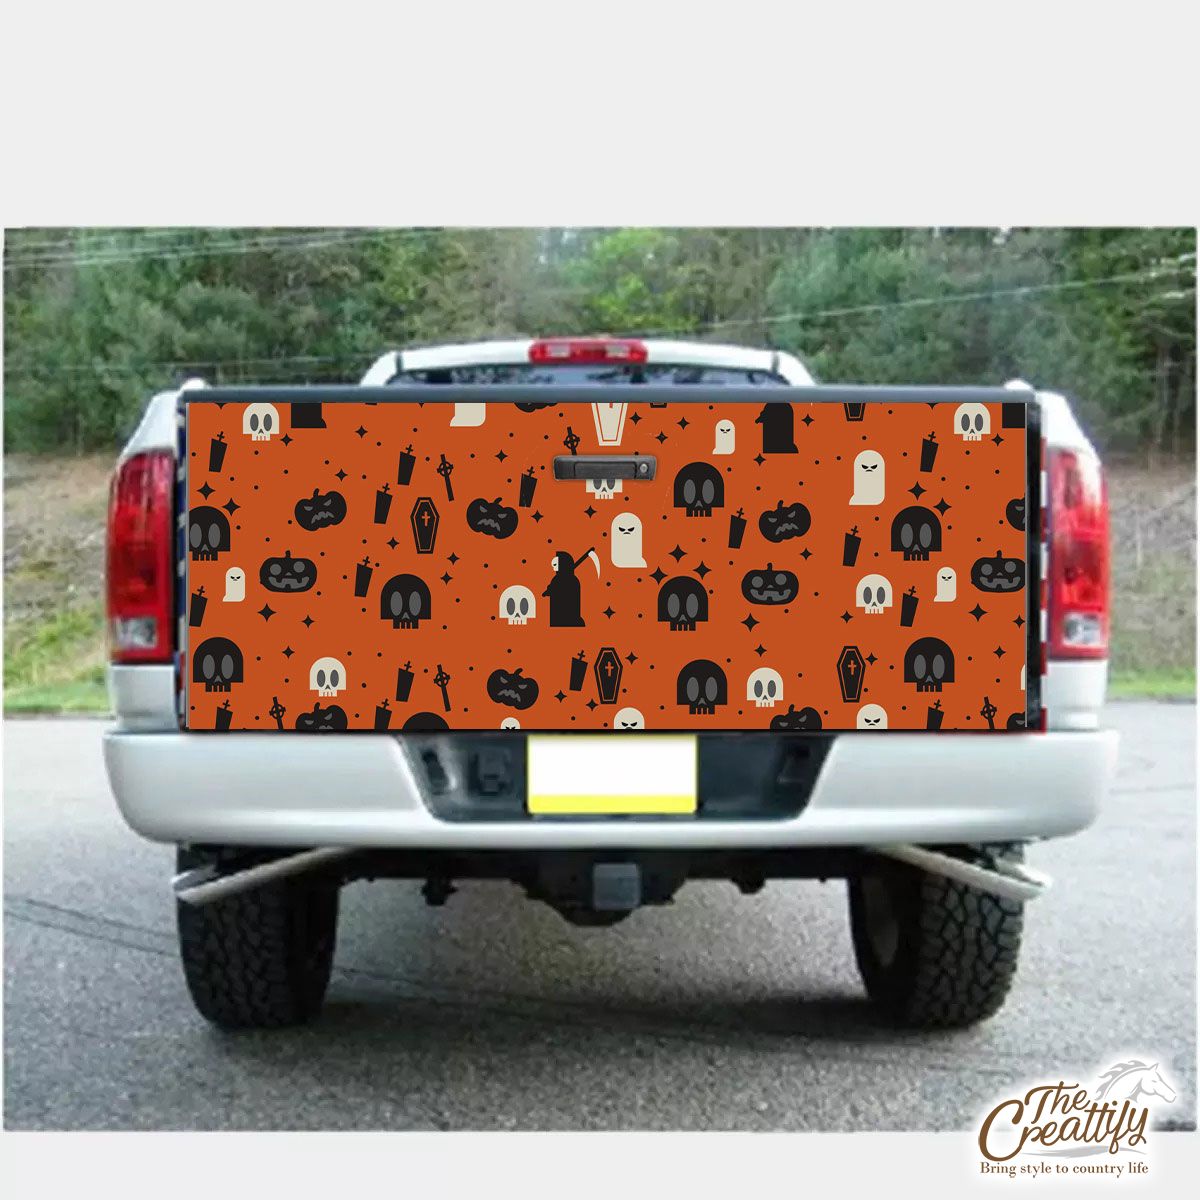 Funny Halloween Skeleton Truck Bed Decal